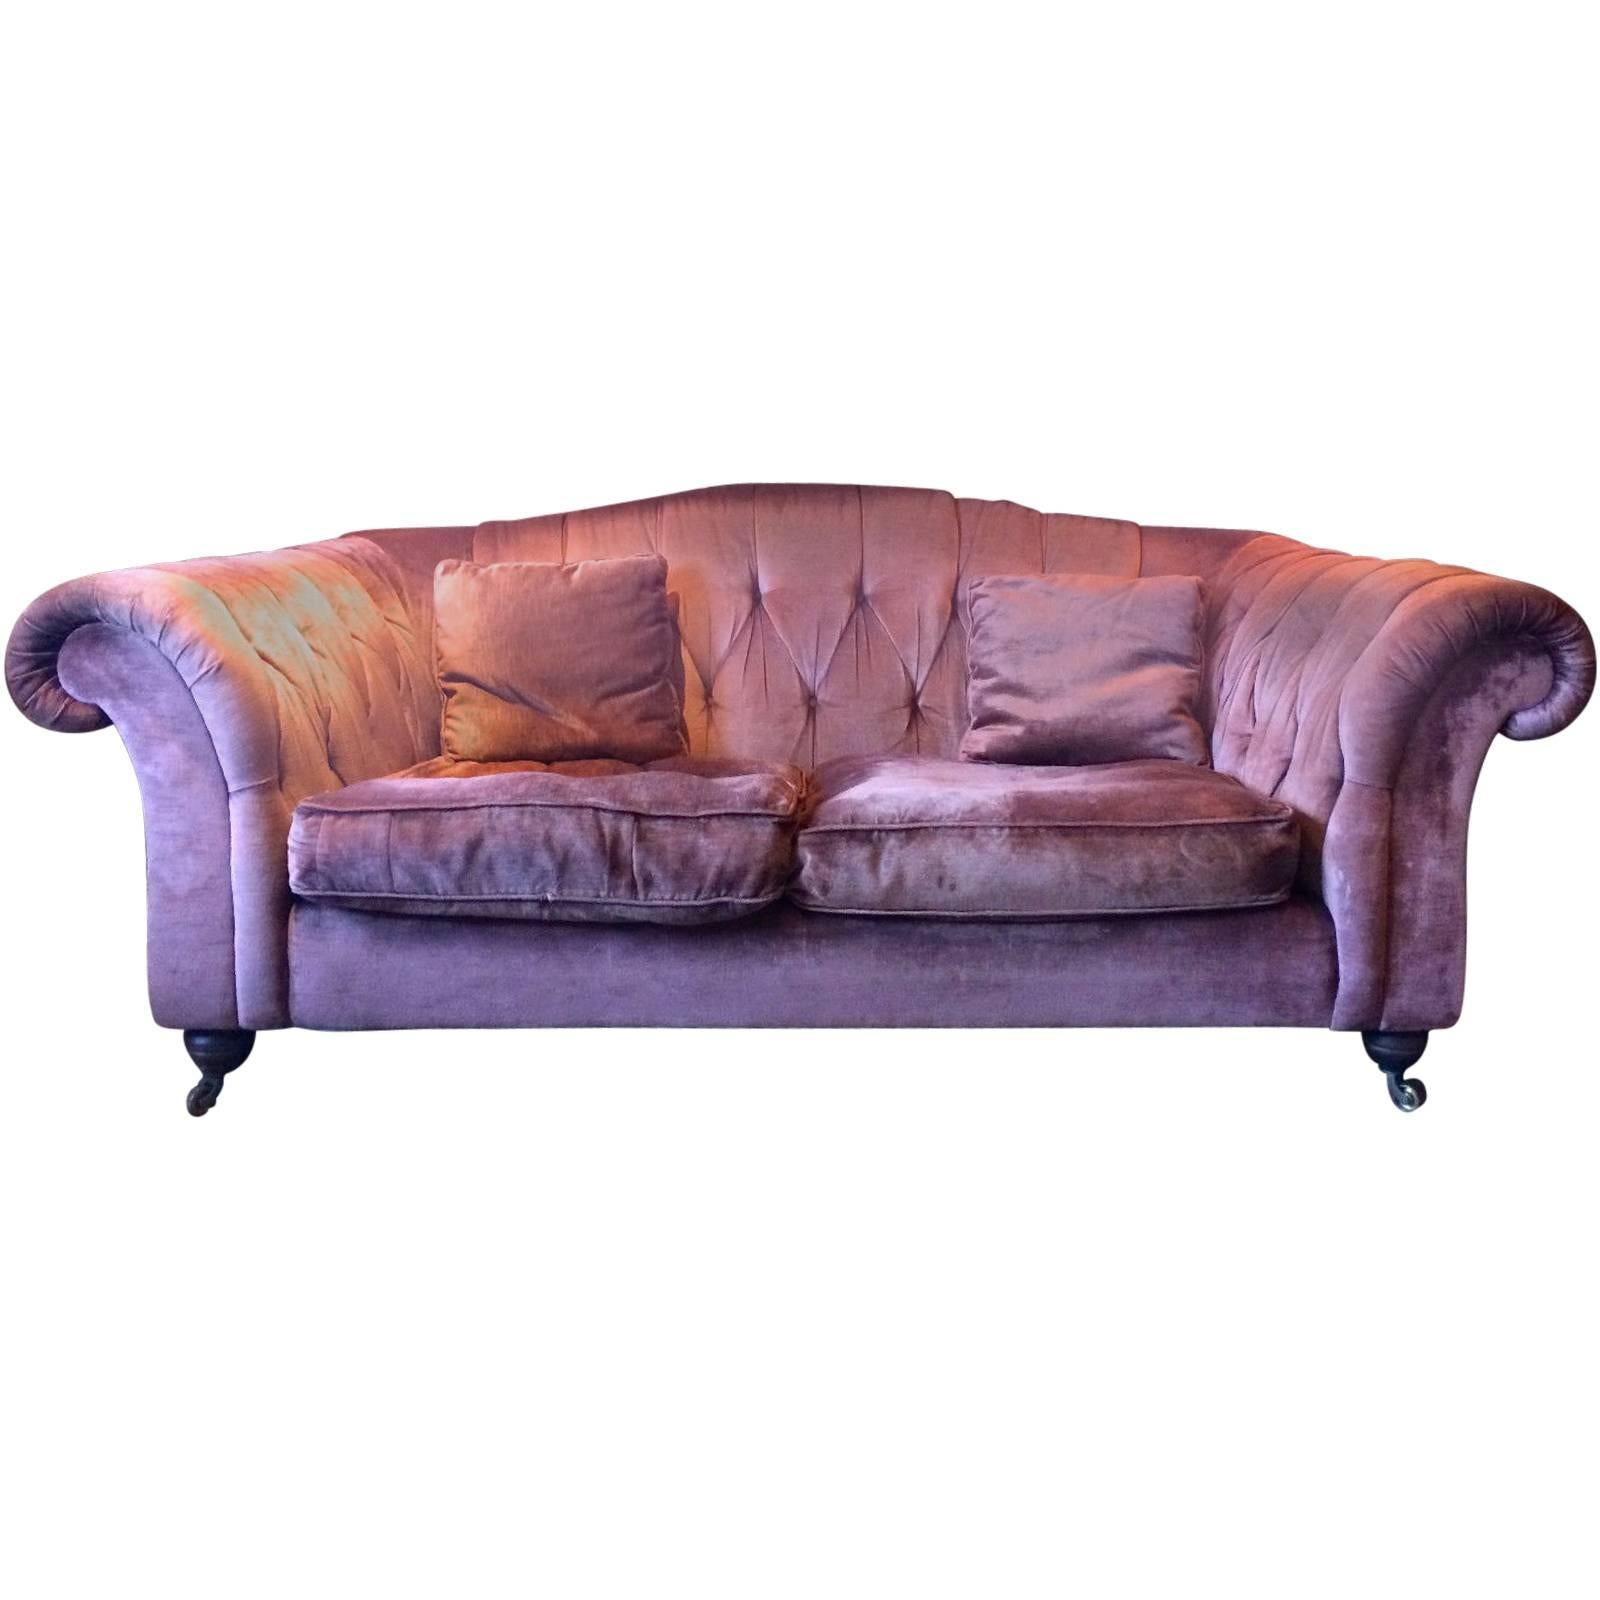 Liberty & Co Chesterfield Sofa Antique Style Button Back Velvet Casters